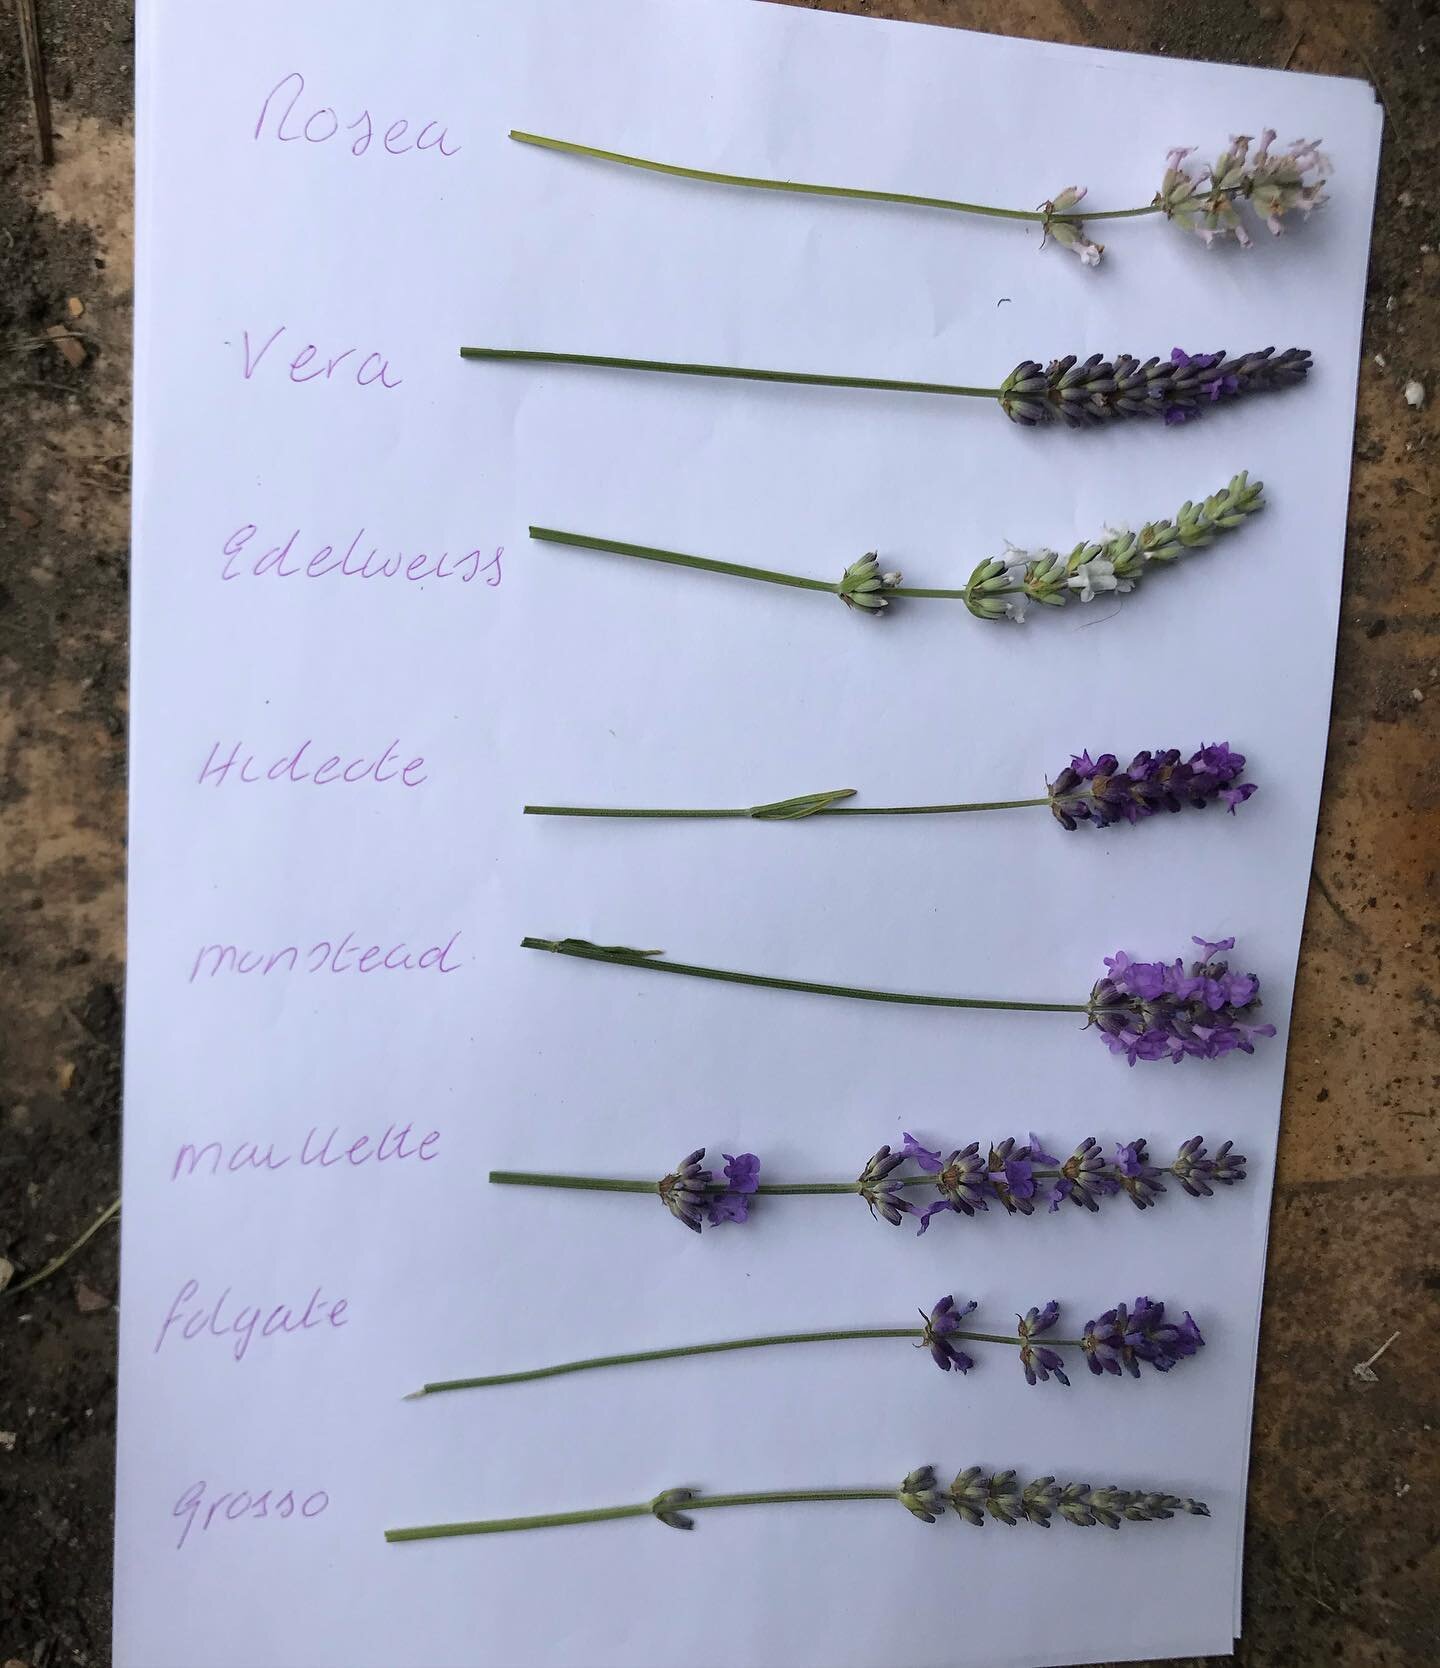 Lavender comes in many variations. 
Here are some I grow. Some easier to grow than others. 
The 2nd pic is @sensoryuploads  beautiful interpretation of pic 1.
Pic 3 -9 in order are
💜Rosea
💜Vera
💜Edelweiss 
💜Hidcote
💜Munstead 
💜Maillette
💜Folga